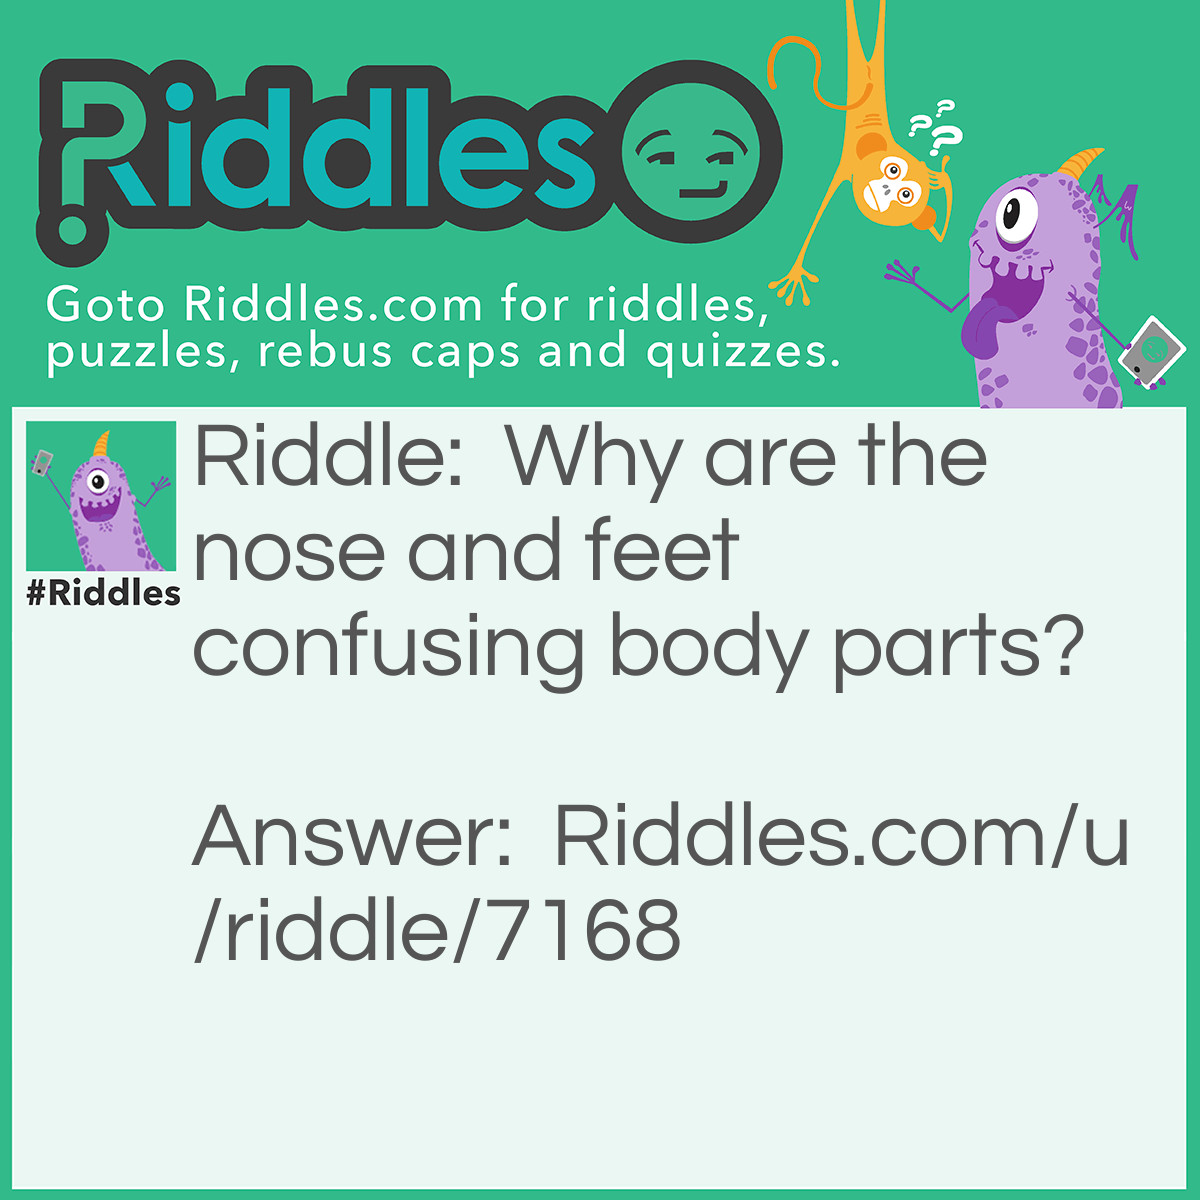 Riddle: Why are the nose and feet confusing body parts? Answer: Because the Nose runs and the feet smell!